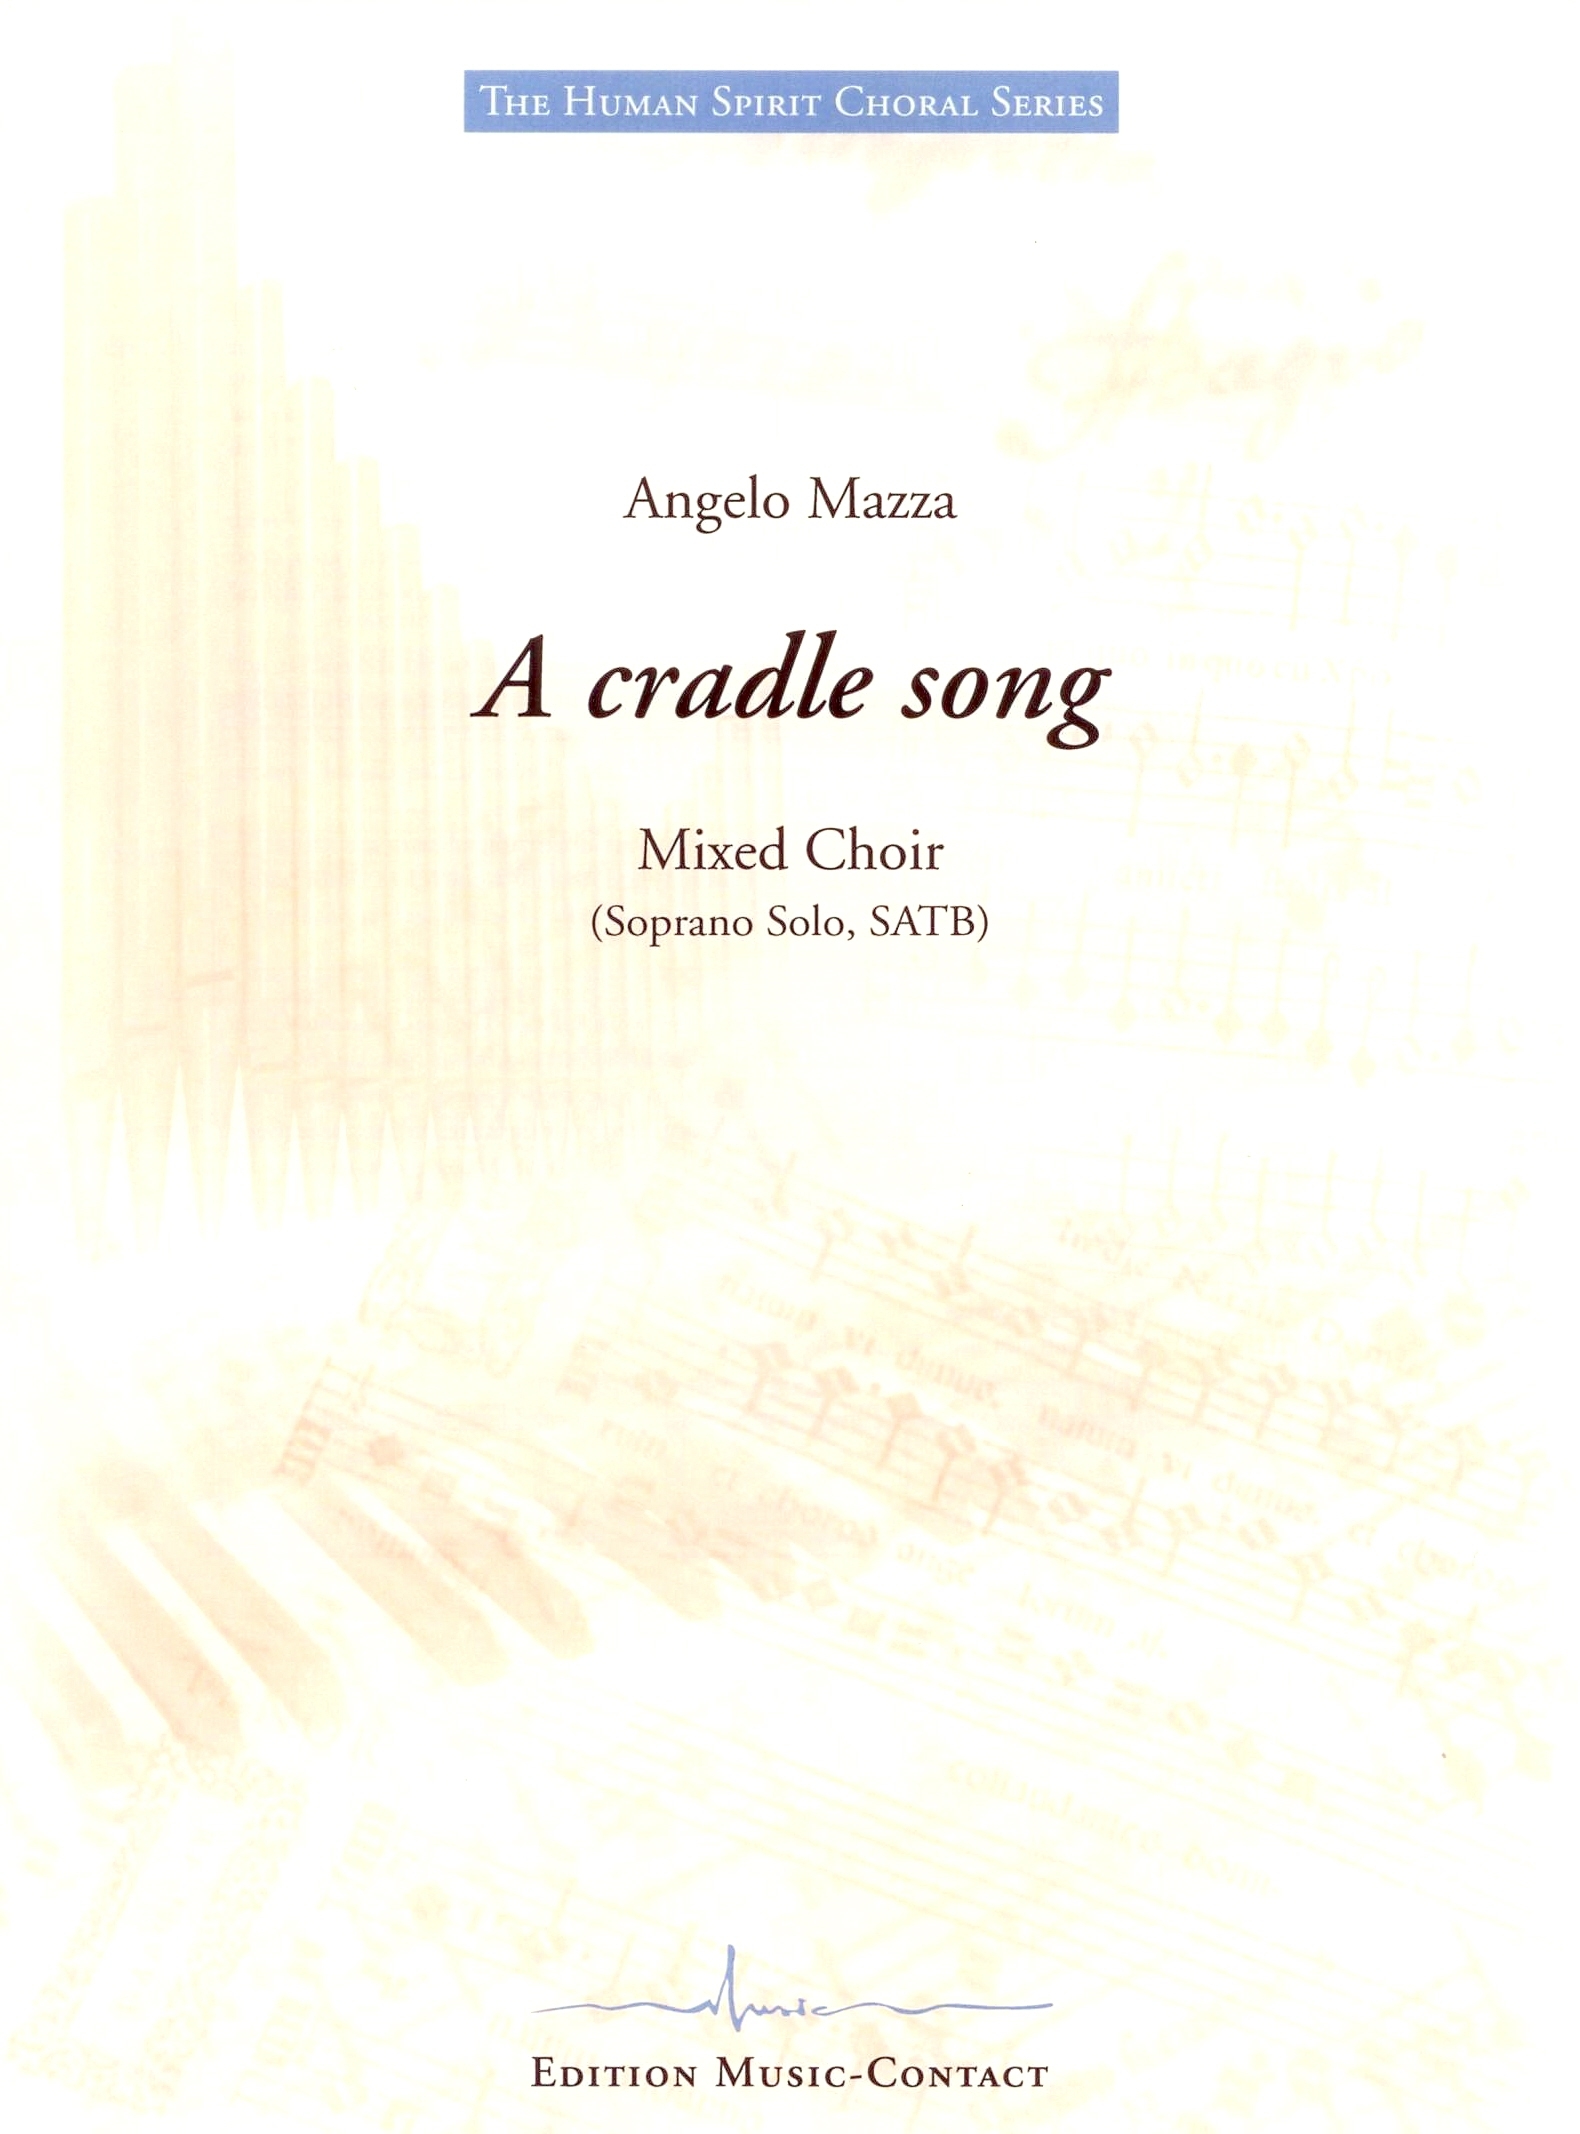 A cradle song - Show sample score